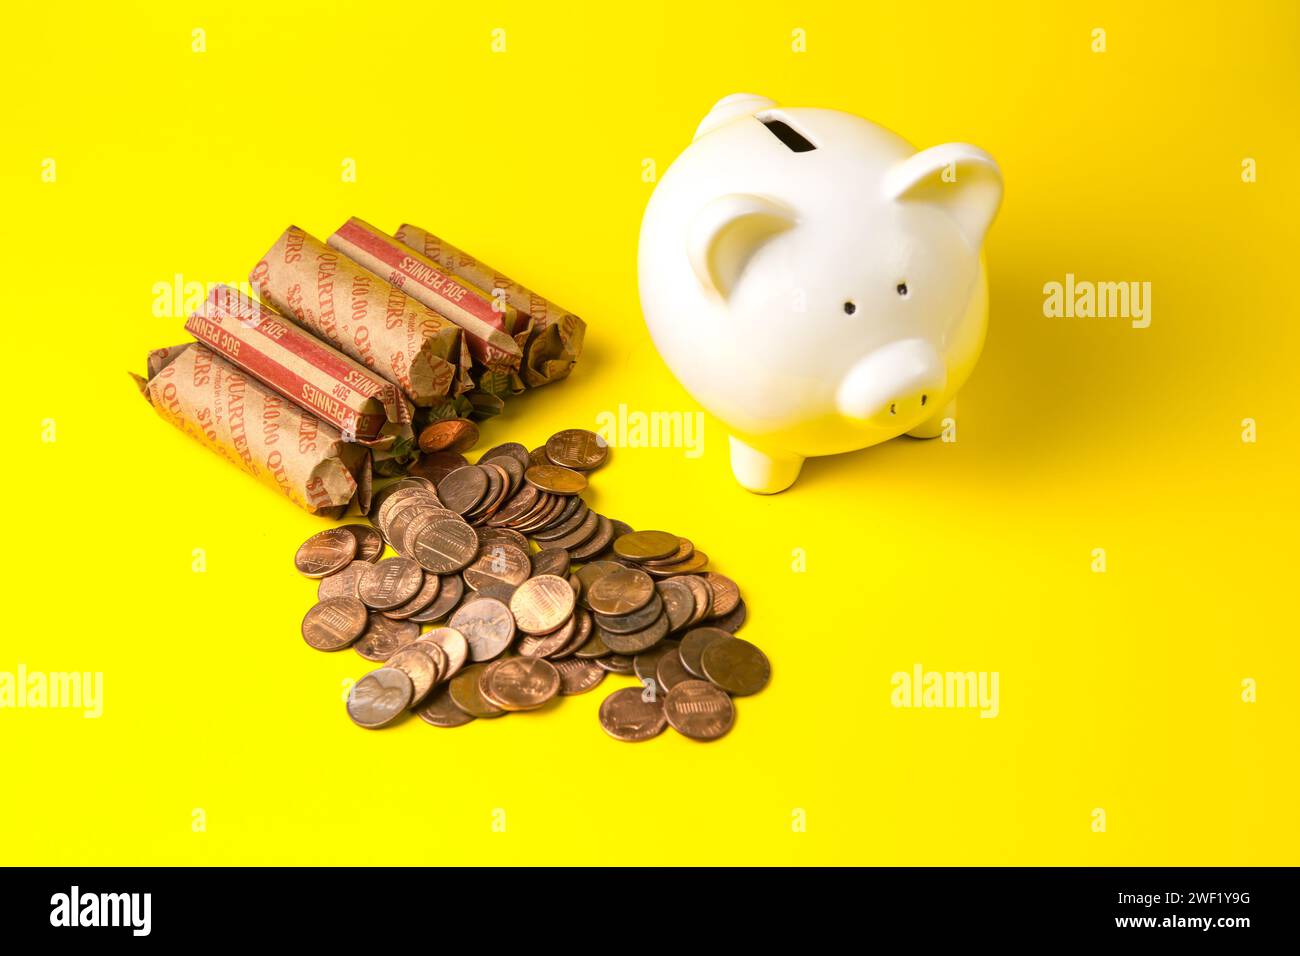 American coin rolls with a white piggy bank on a yellow background Stock Photo